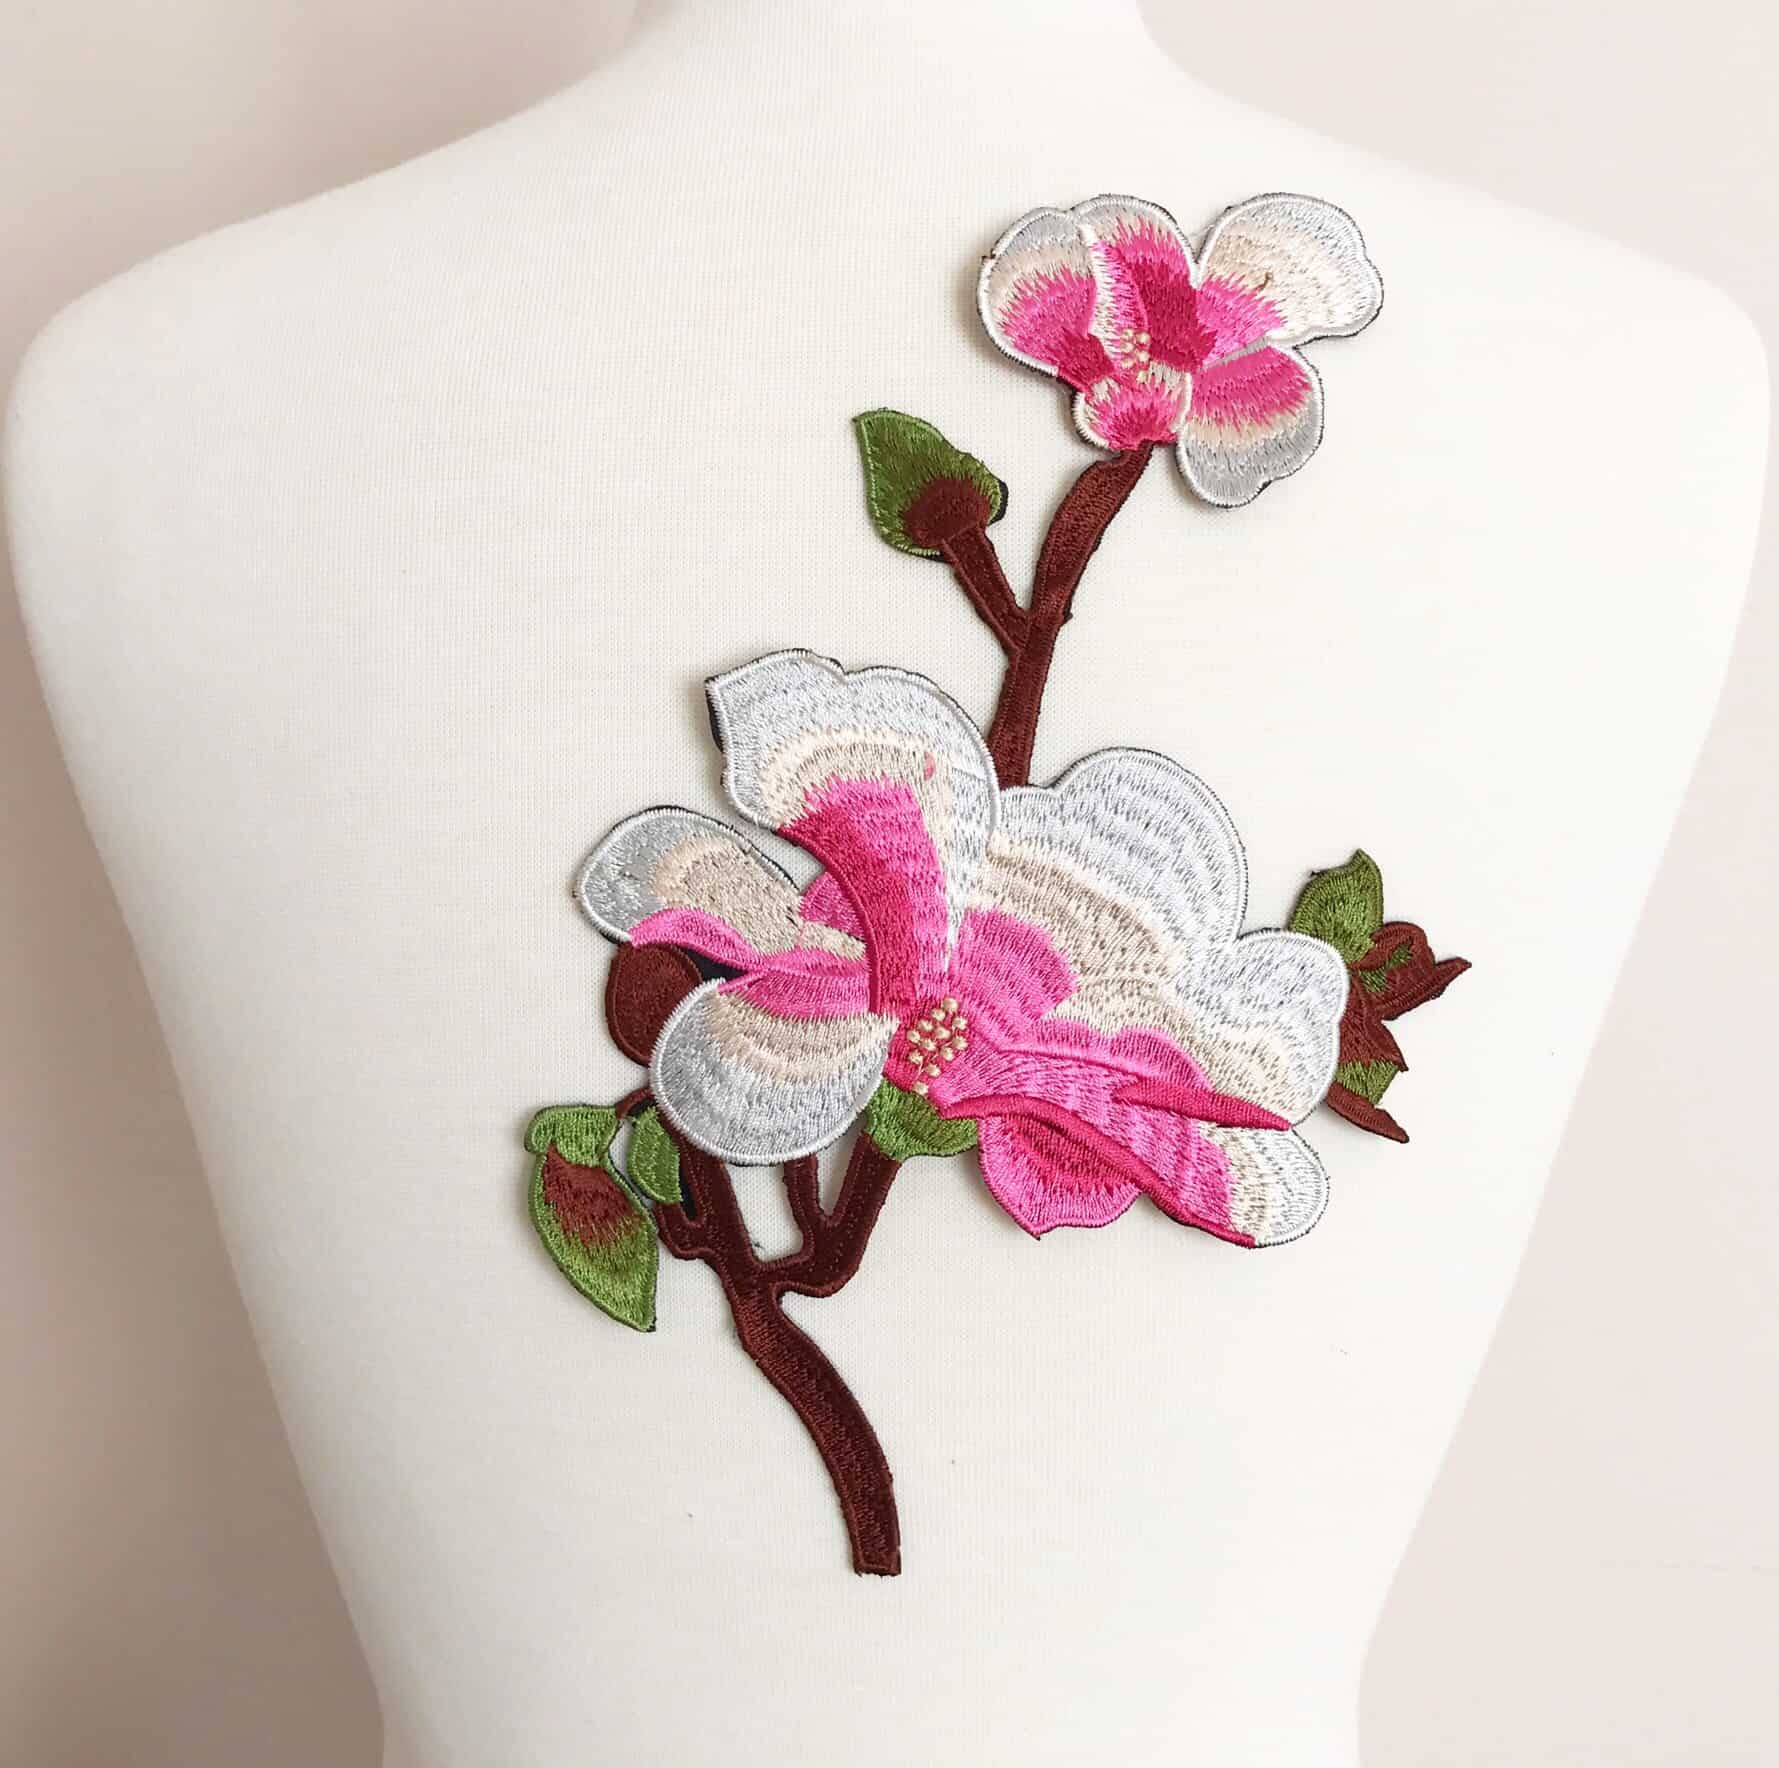 Embroidery Large Flower Clothing Applique Patch - OneYard